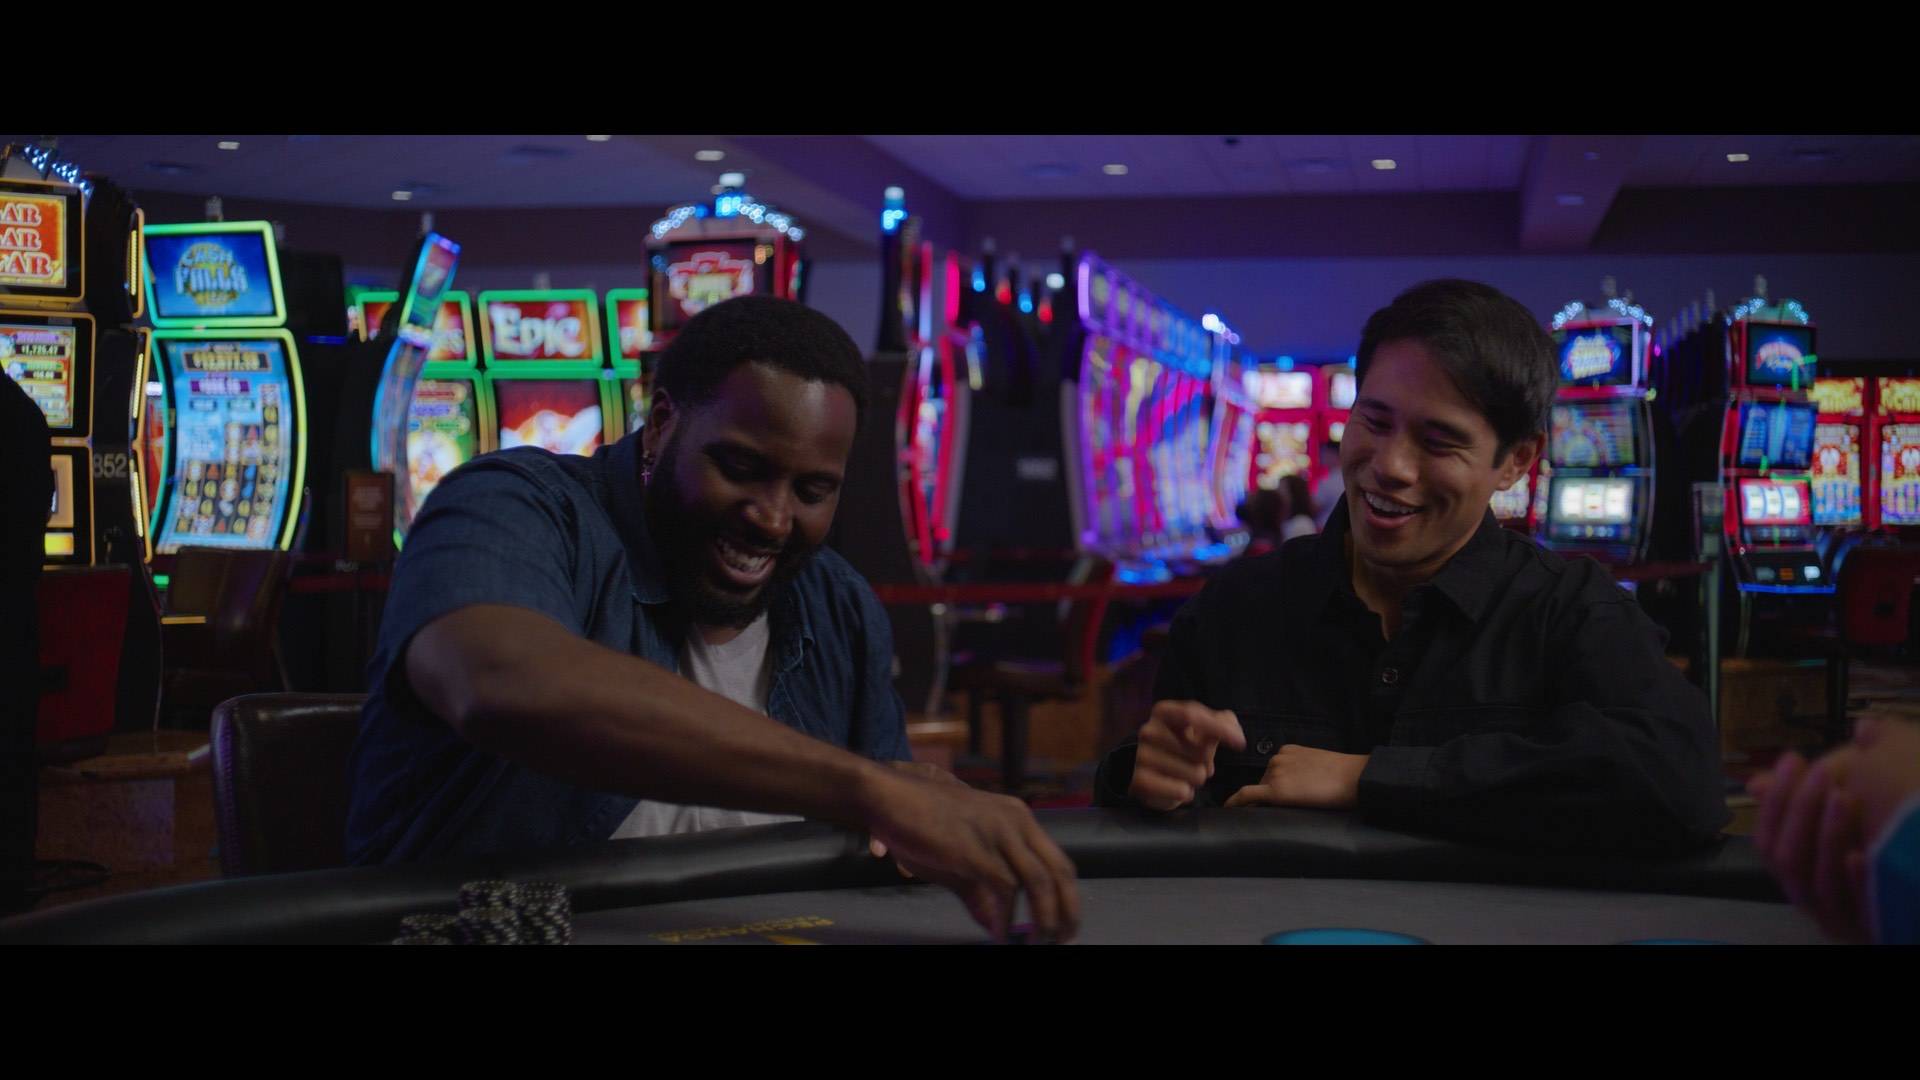 Behind the senes of two characters playing in a casino